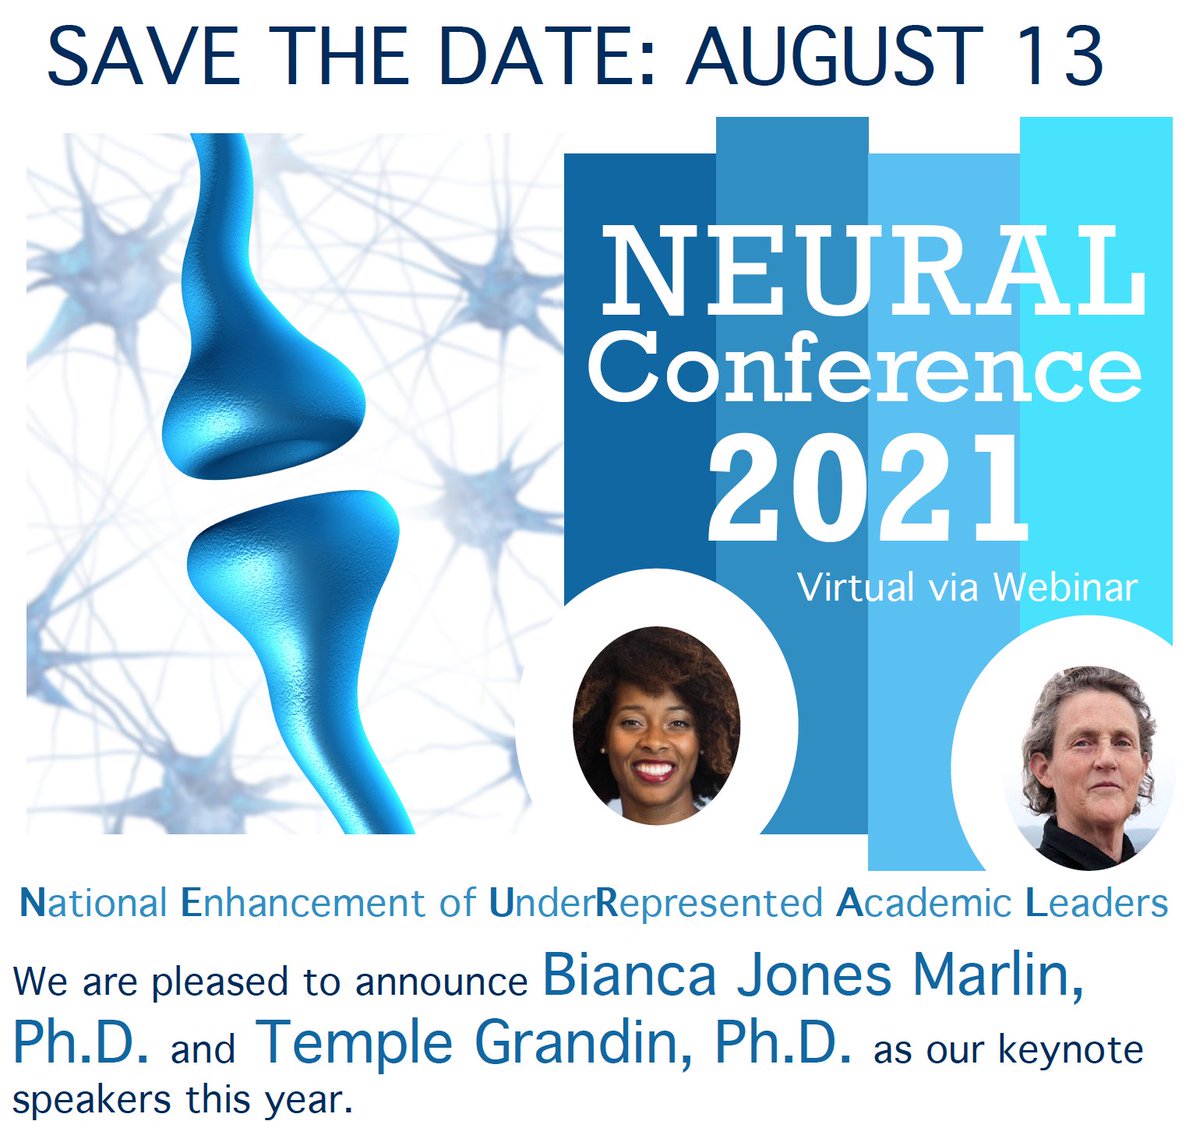 @UAB_CNC See you at the 2021 NEURAL  (National Enhancement of UnderRepresented Academic Leaders) conference! Looking forward to another great conference on Aug 13